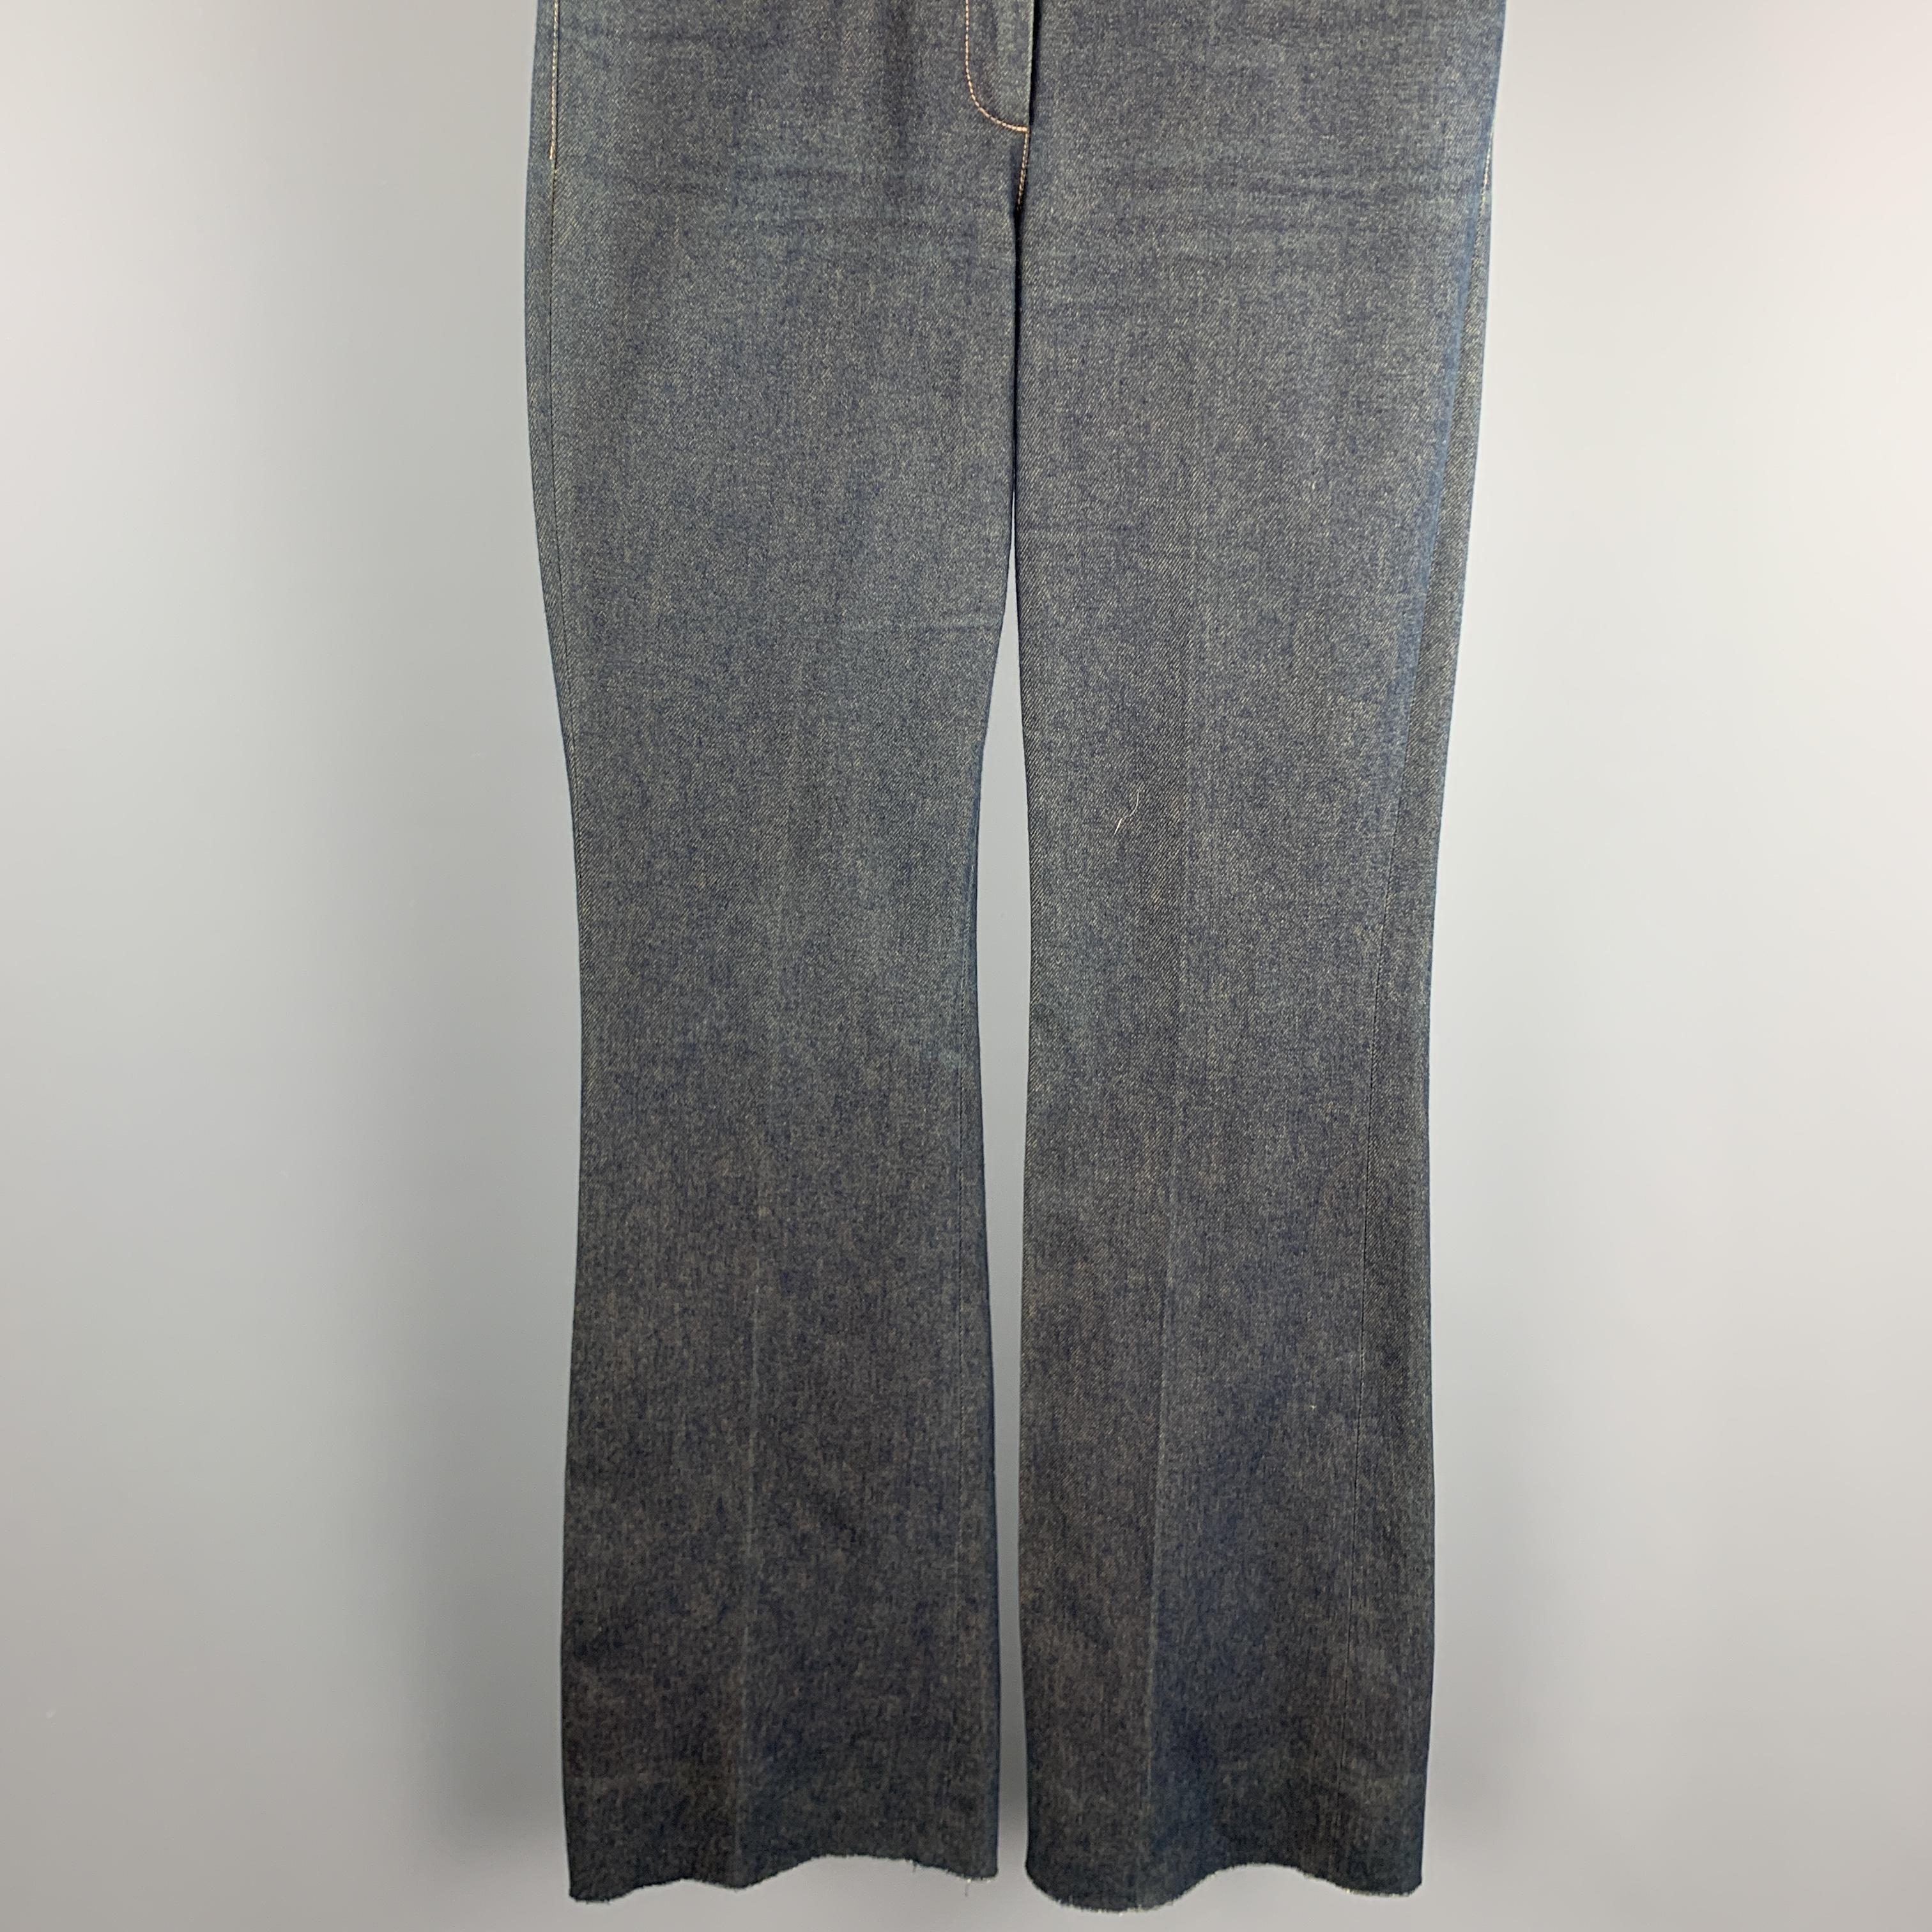 size 8 womens to mens pants